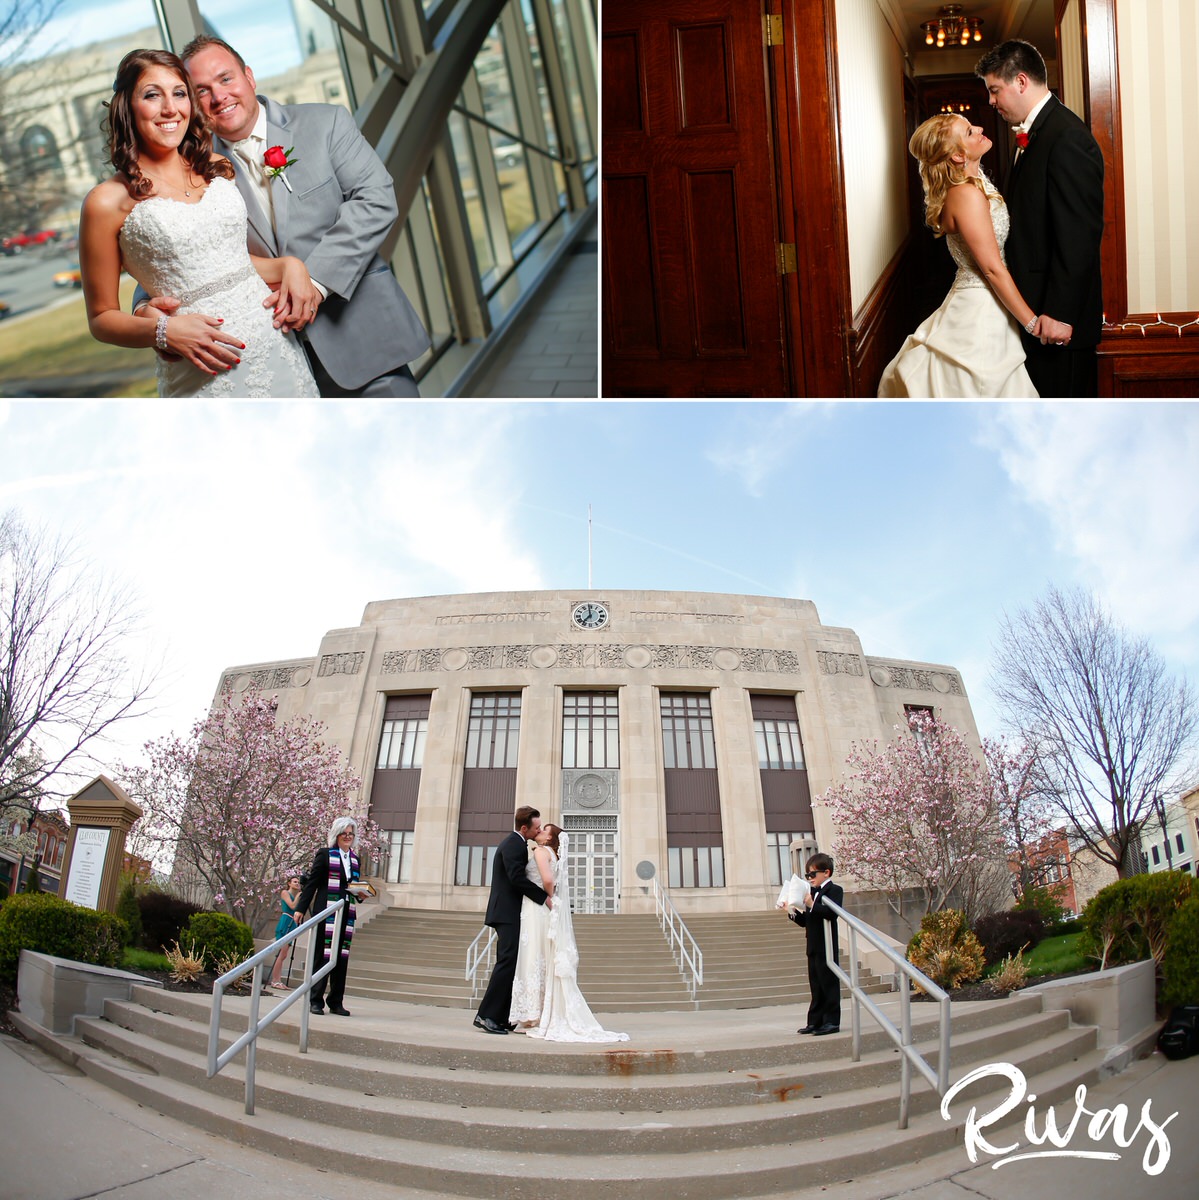 A collage of three wedding photos taken during the winter of 2011 of three different brides and grooms embracing and getting married.